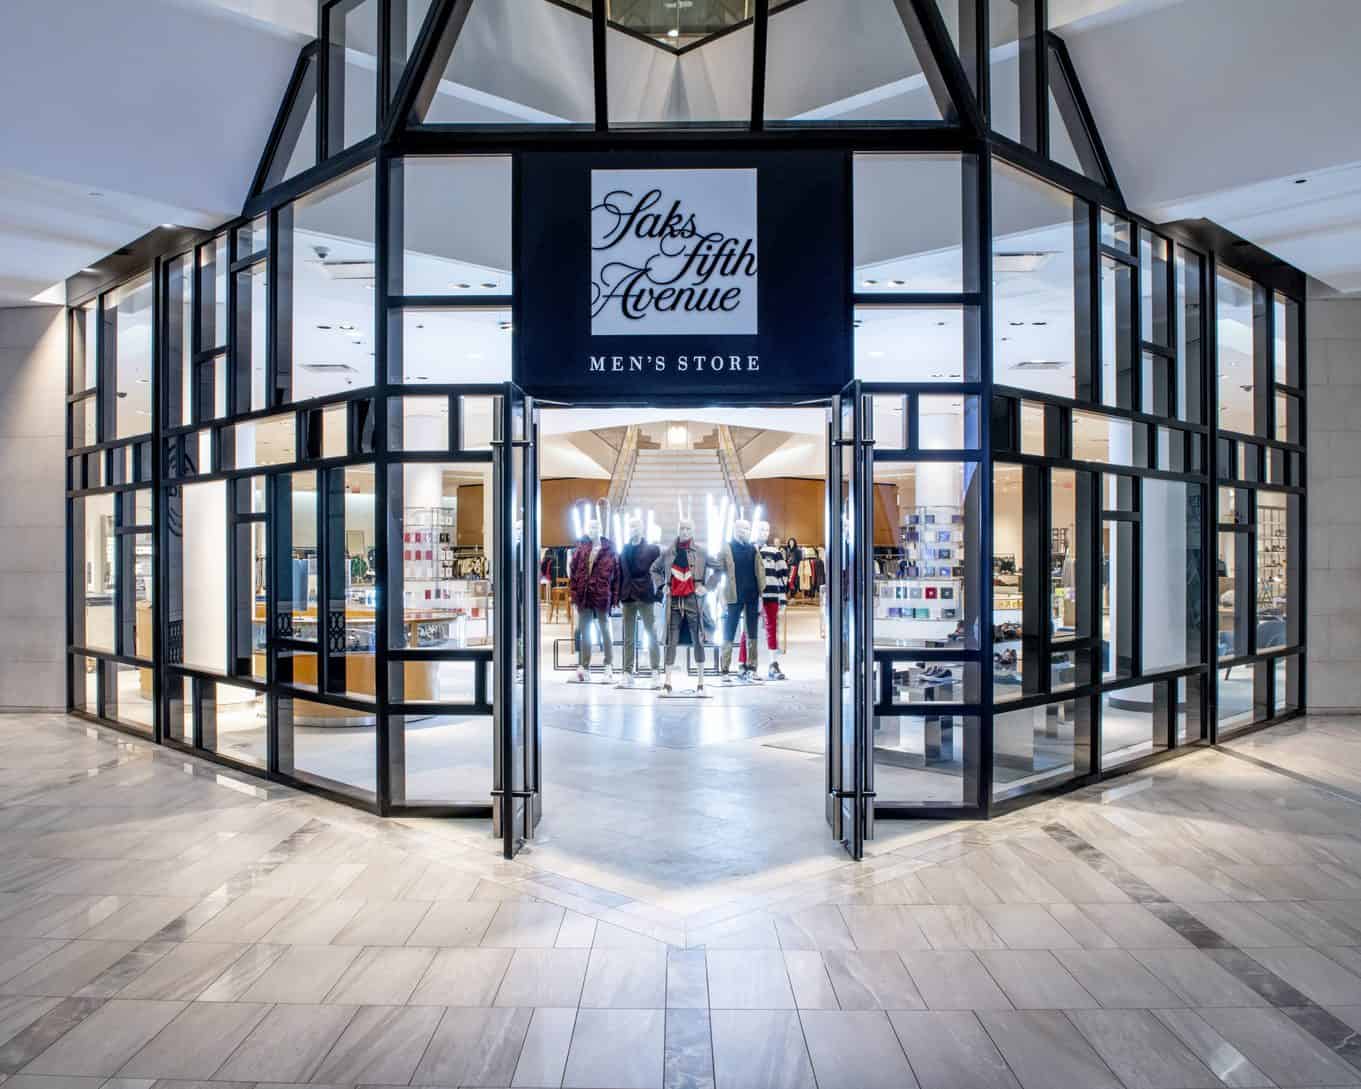 what is saks fifth avenue?